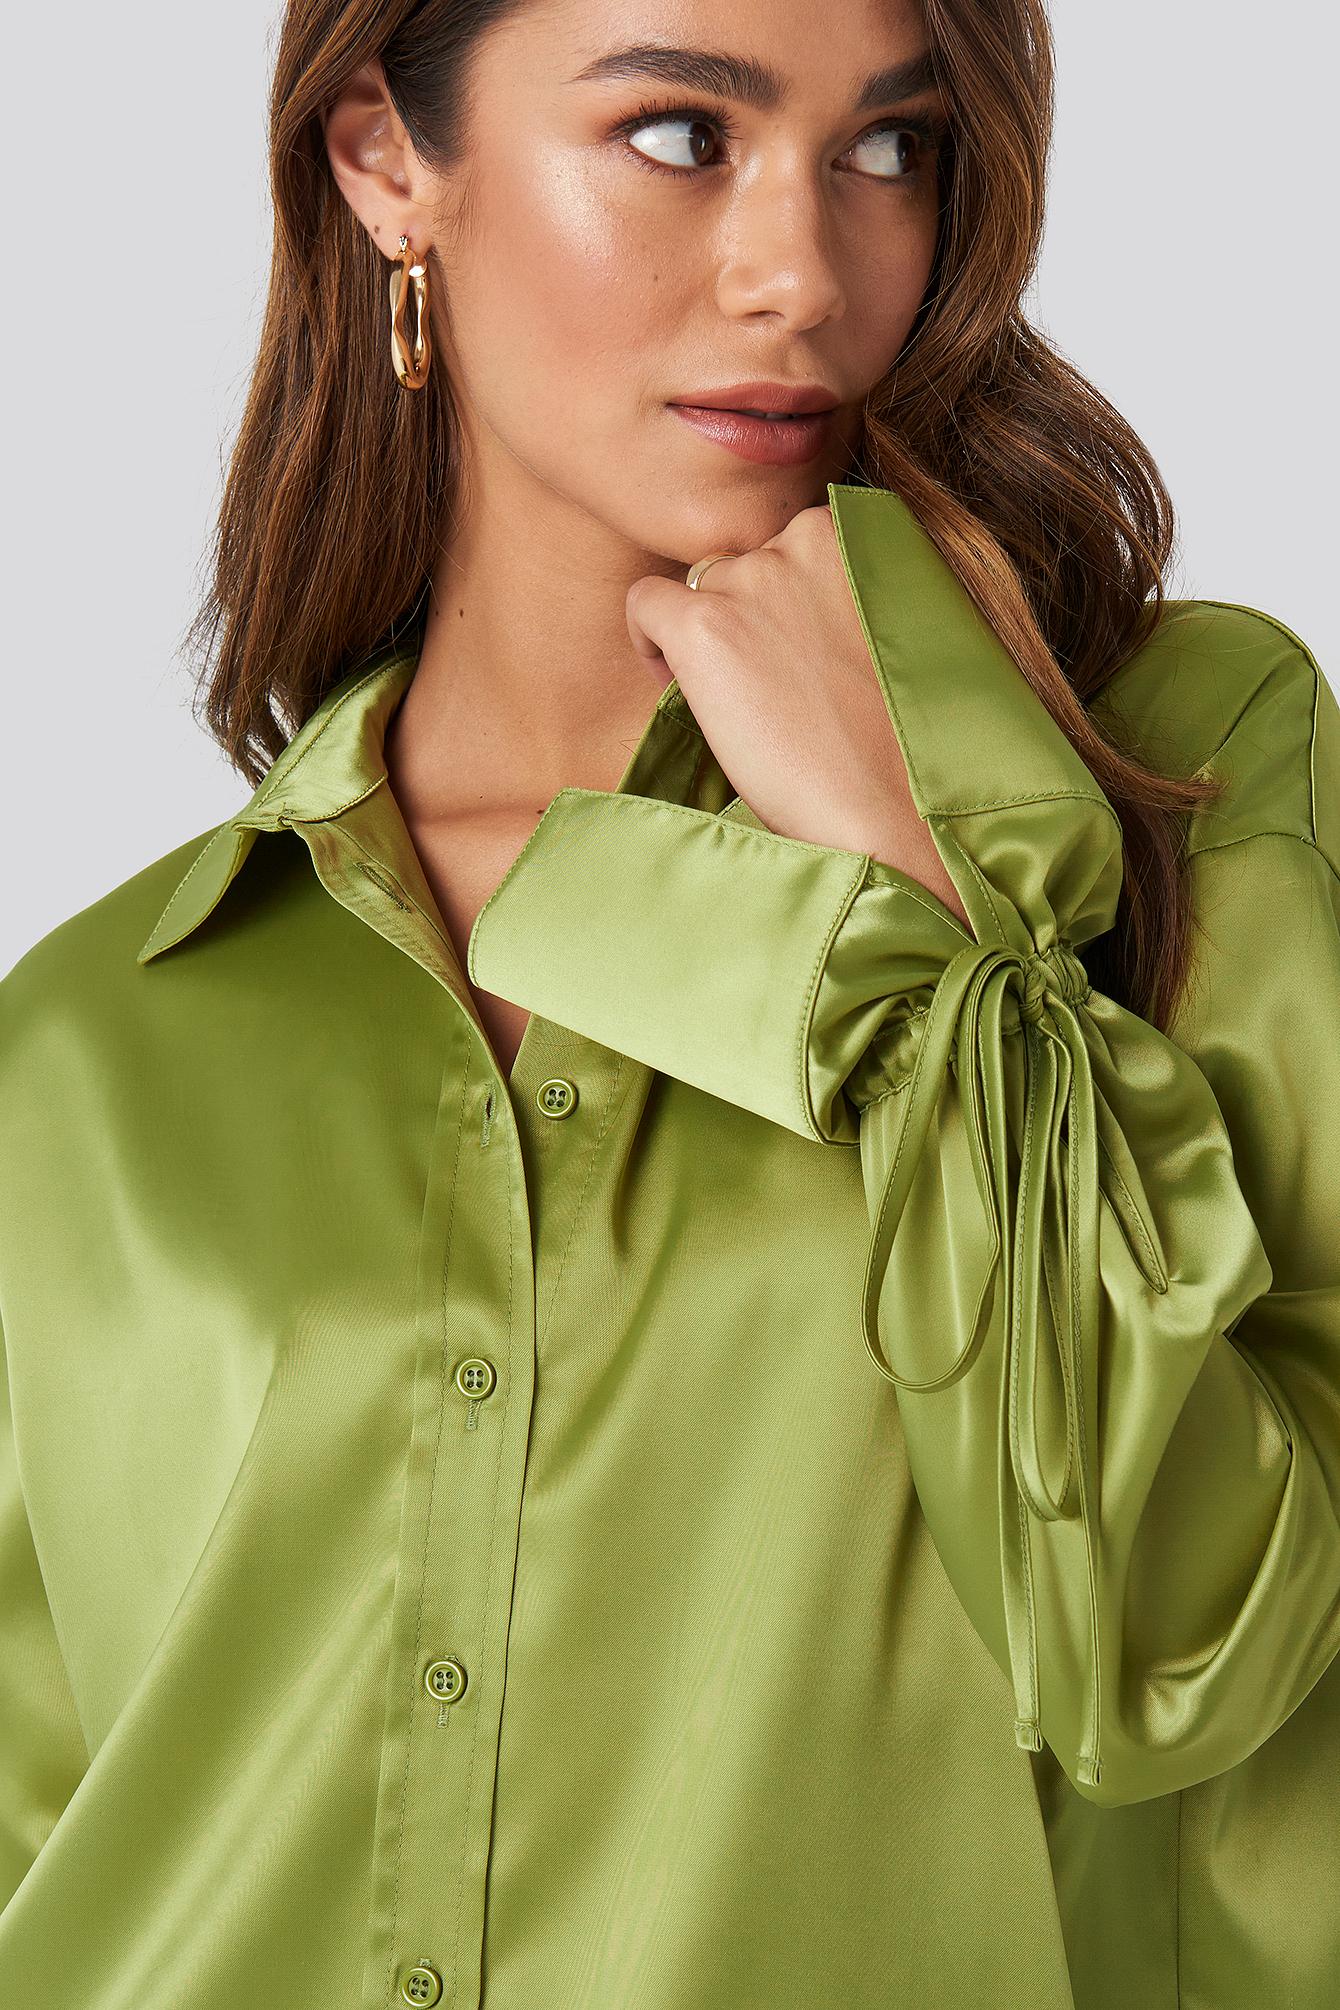 tie up satin shirt - OFF-65% >Free Delivery